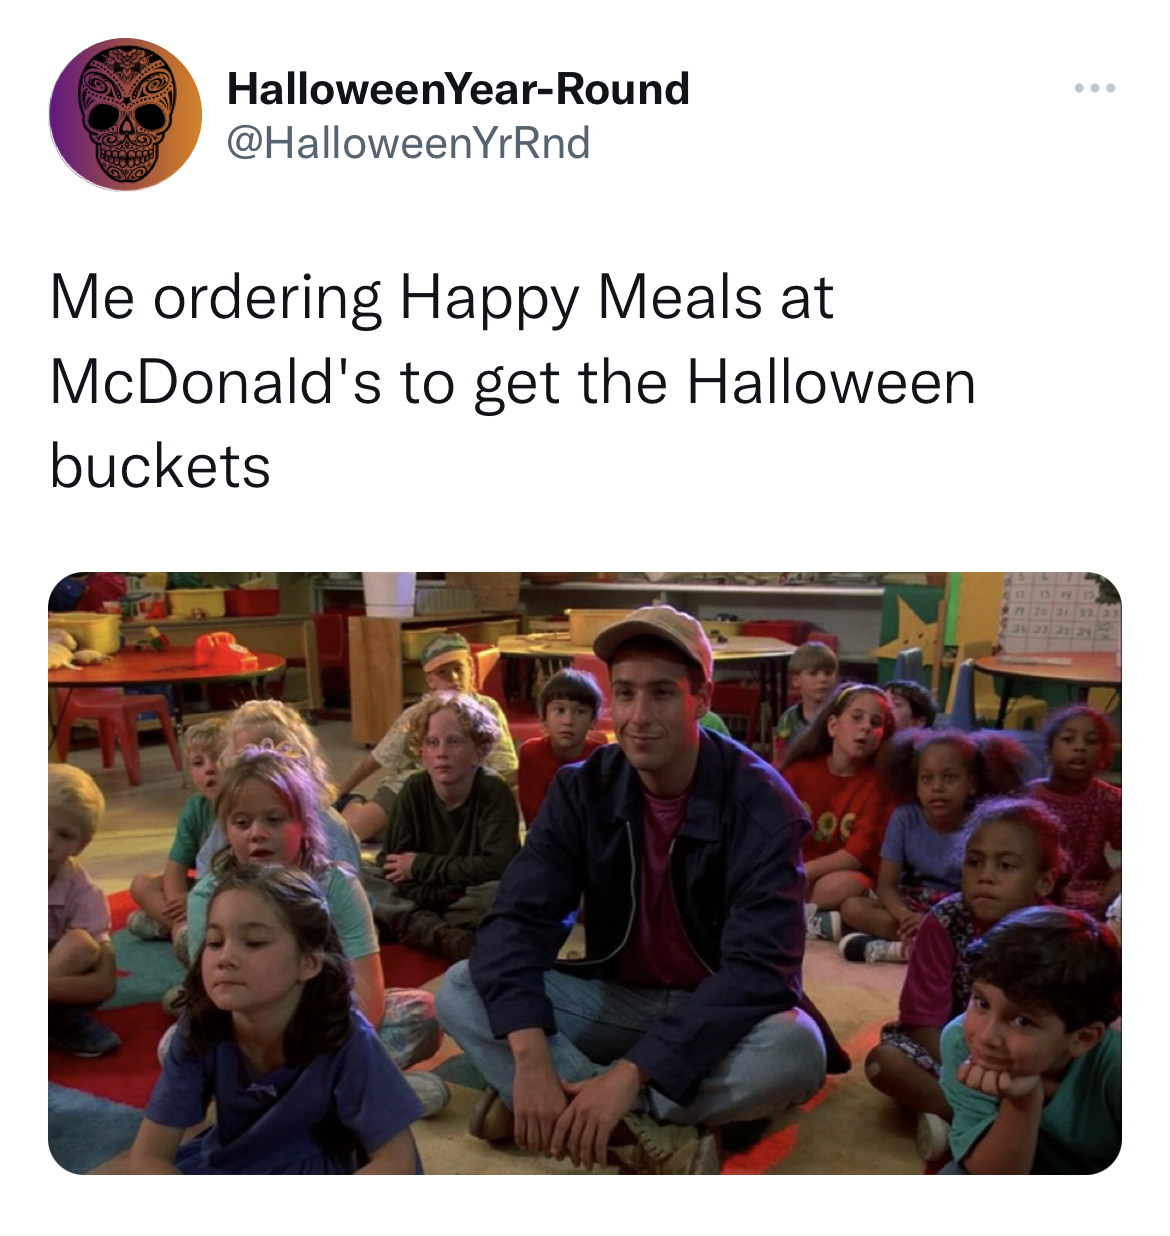 Savage and hilarious tweets - me watching incredibles 2 - HalloweenYearRound Me ordering Happy Meals at McDonald's buckets to get the Halloween Oc